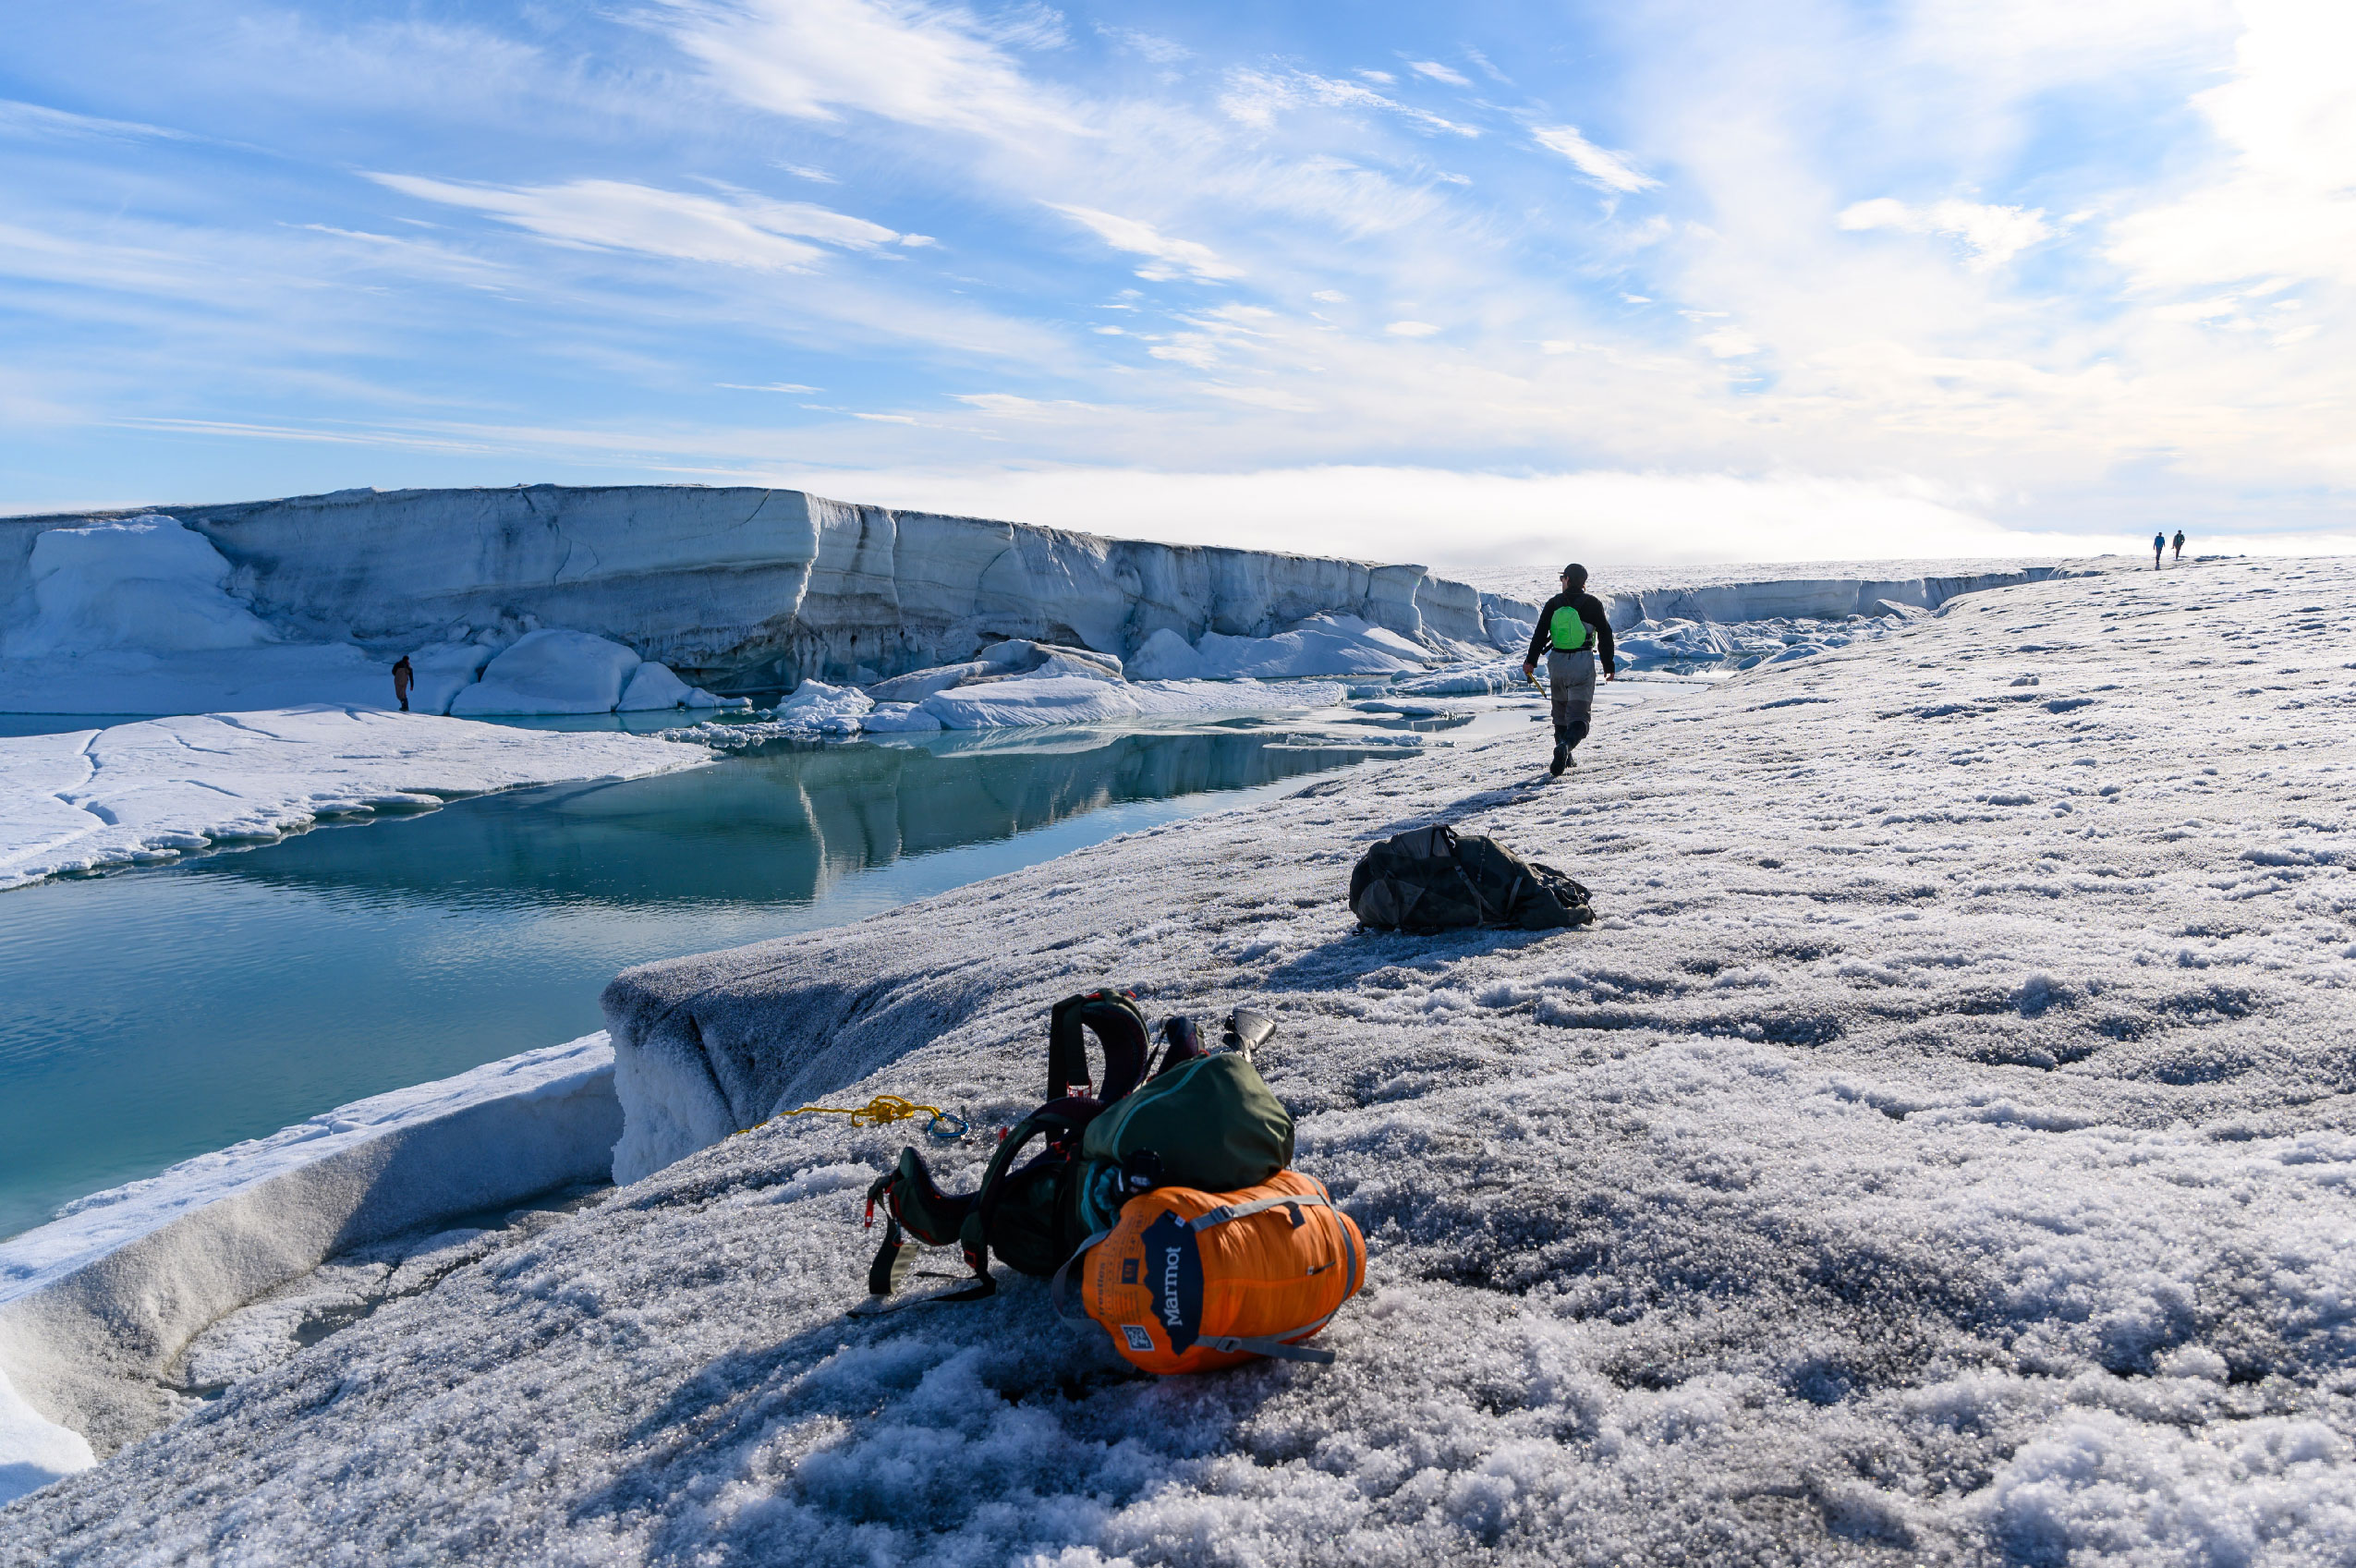 A team scouts for a location to do a conductivity, temperature and depth cast in a channel on the ice shelf. Backpacks and supplies are on the ice.